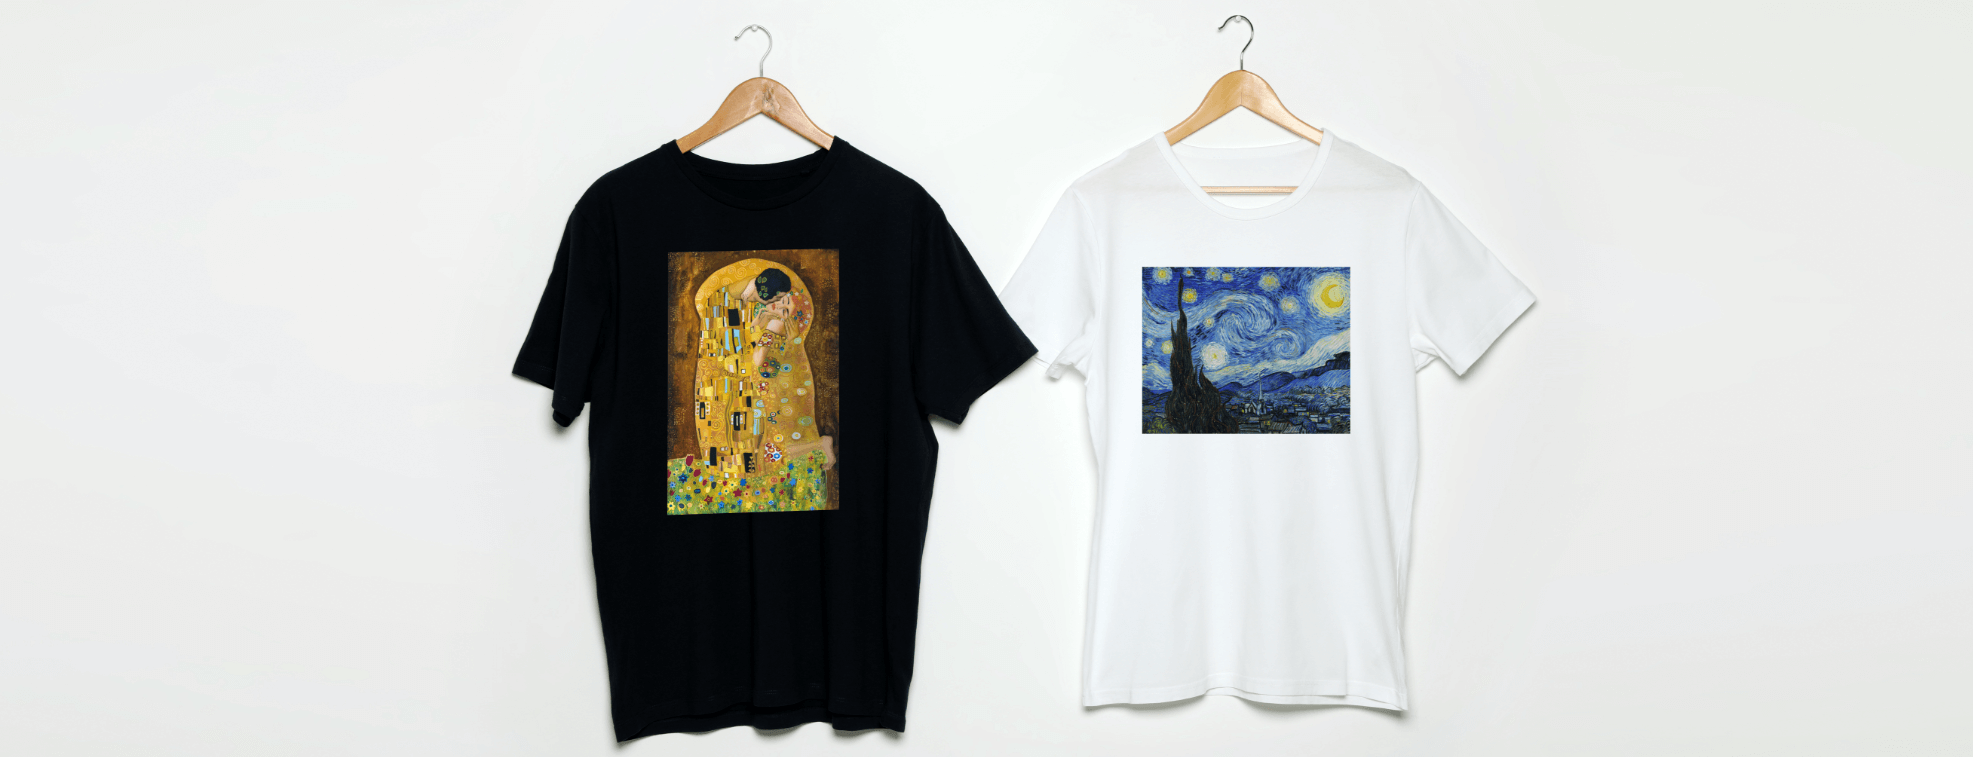 Custom T-shirts with art works by Klimt and Van Gogh